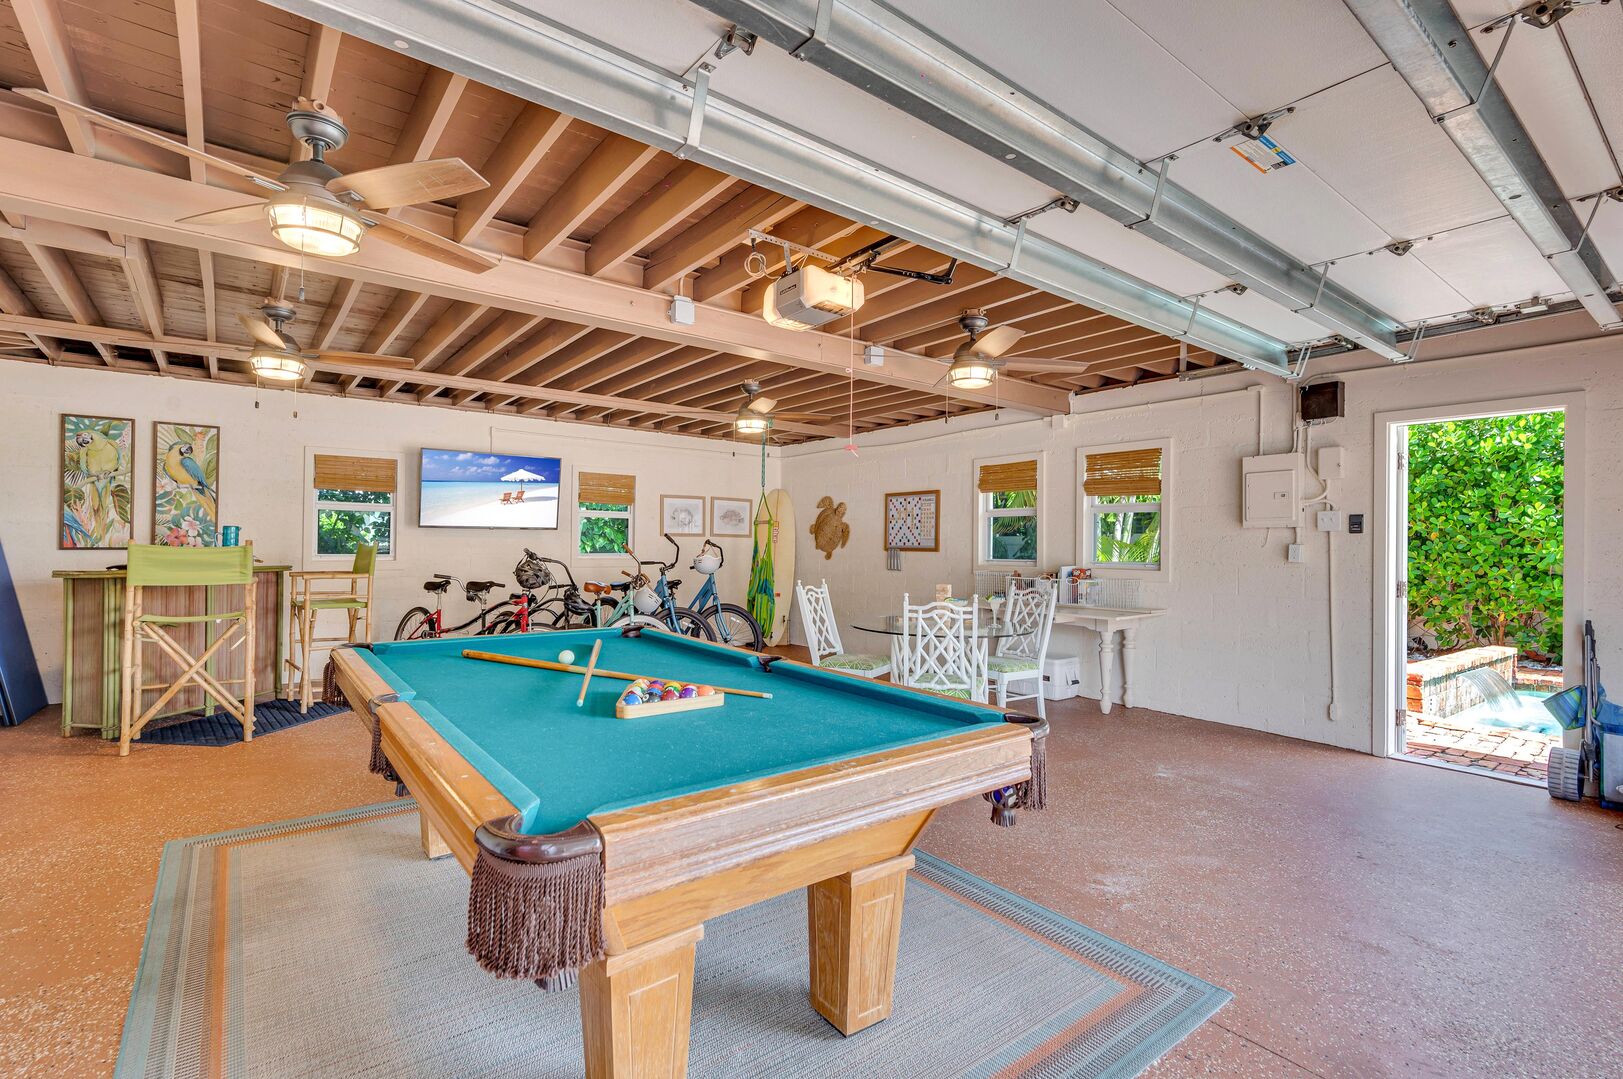 The game room features a ping-pong/pool table, seating and bar area.